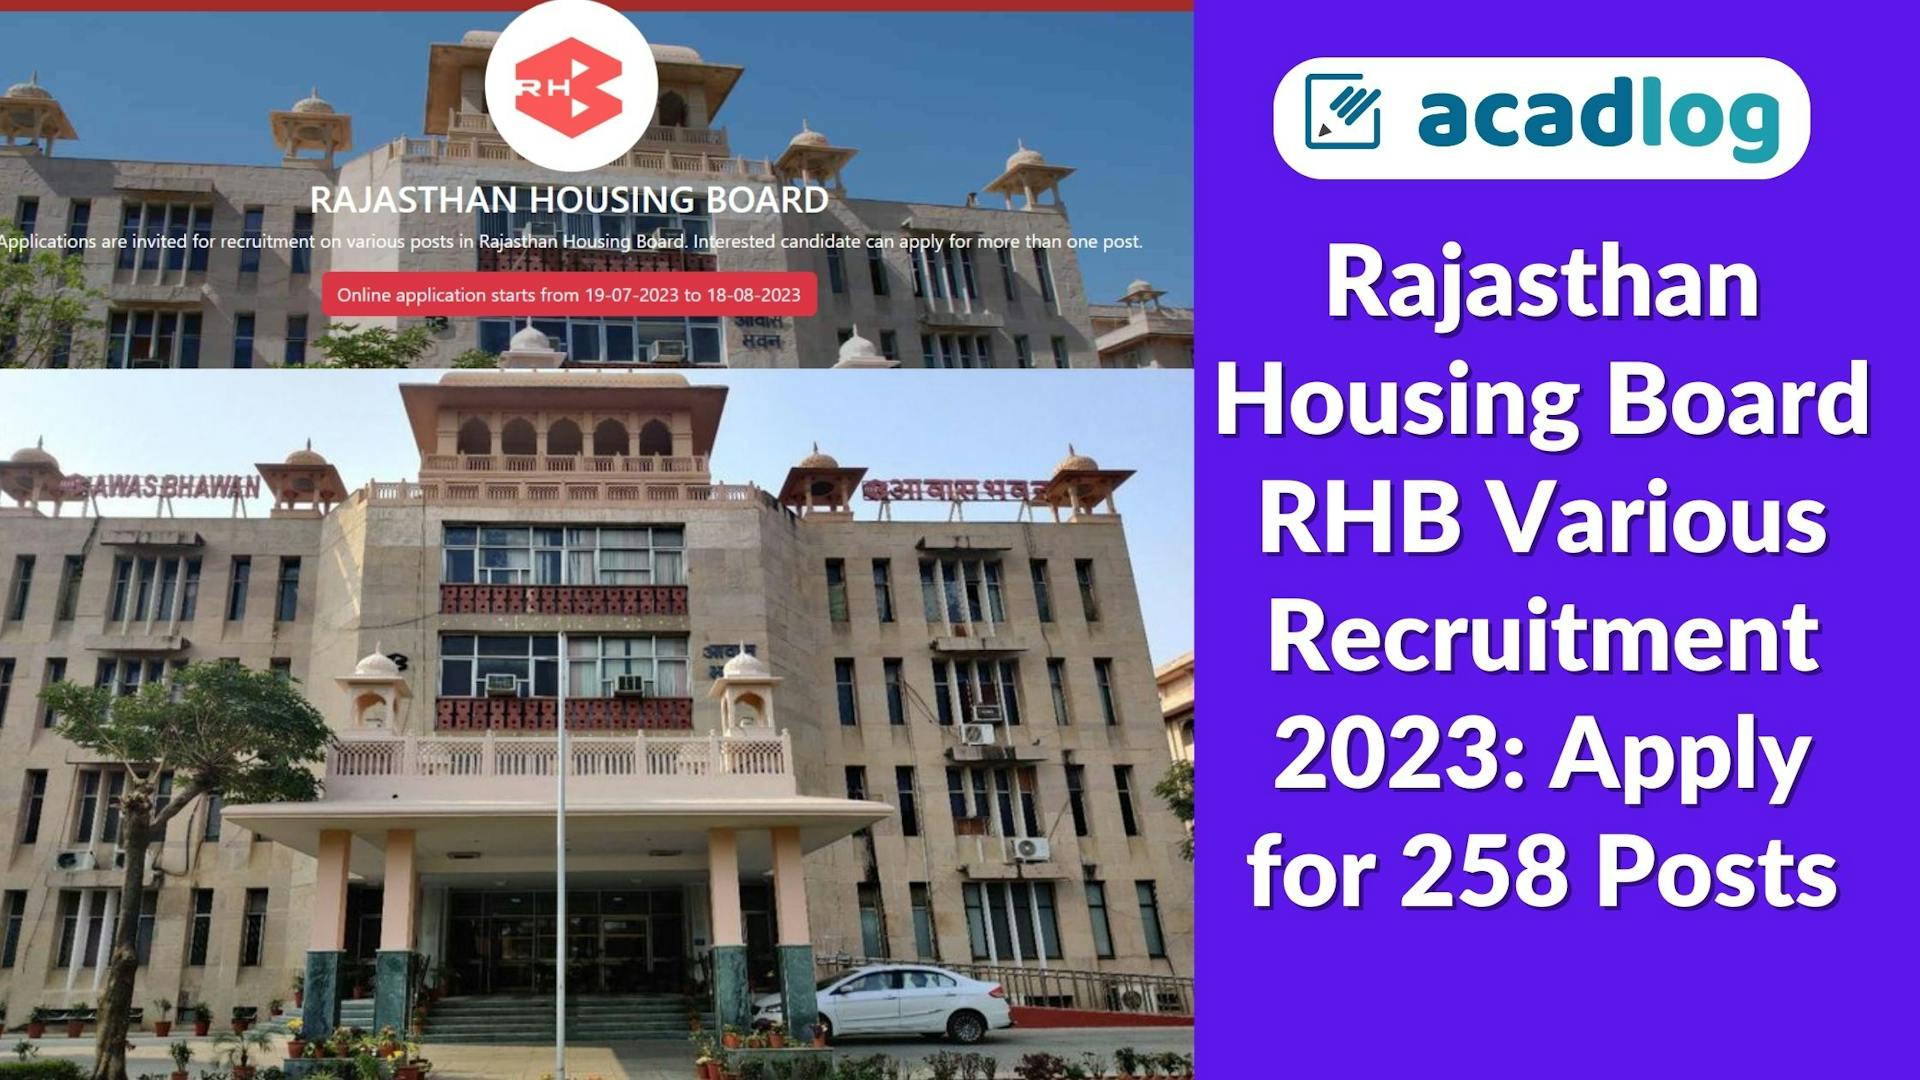 Rajasthan Housing Board RHB Various Recruitment 2023: Apply for 258 Posts